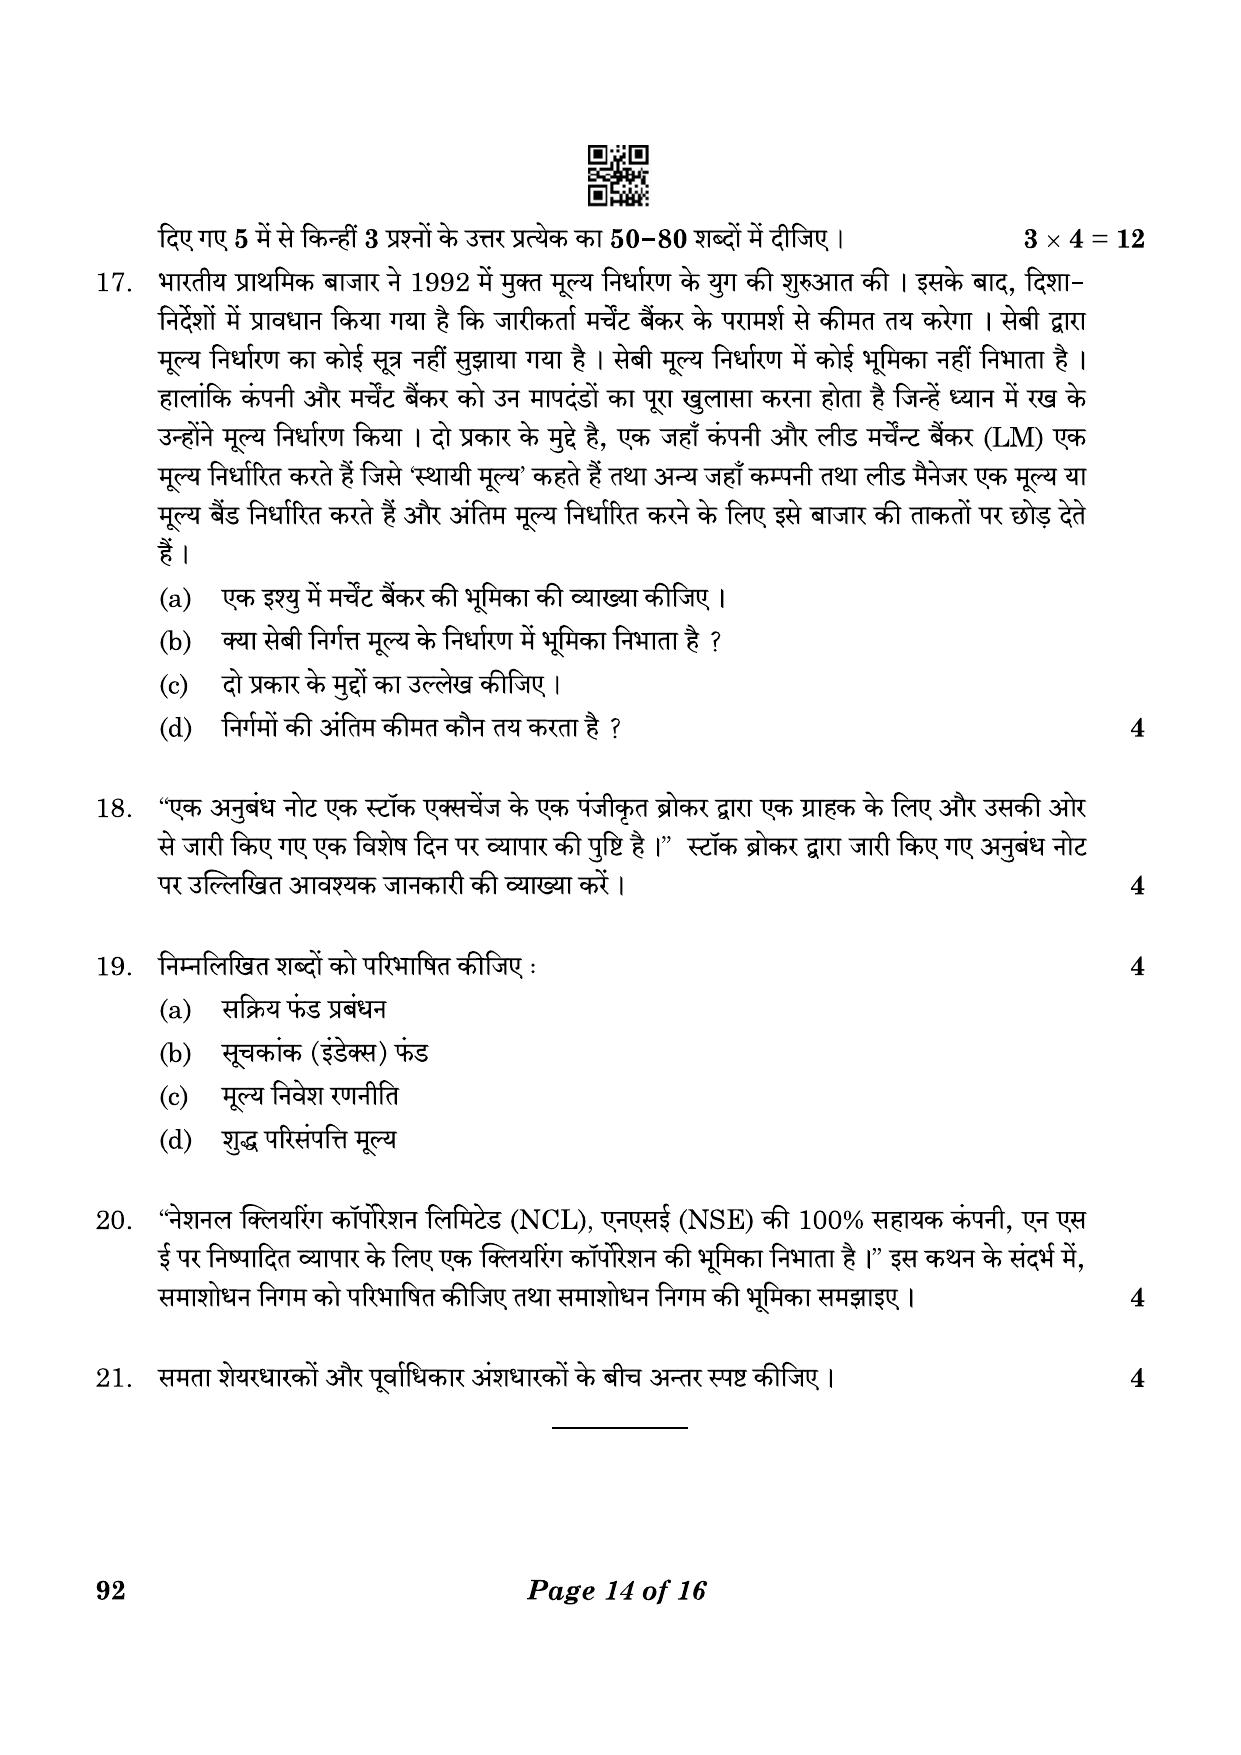 CBSE Class 10 92 Introduction To Financial Markets 2023 Question Paper - Page 14